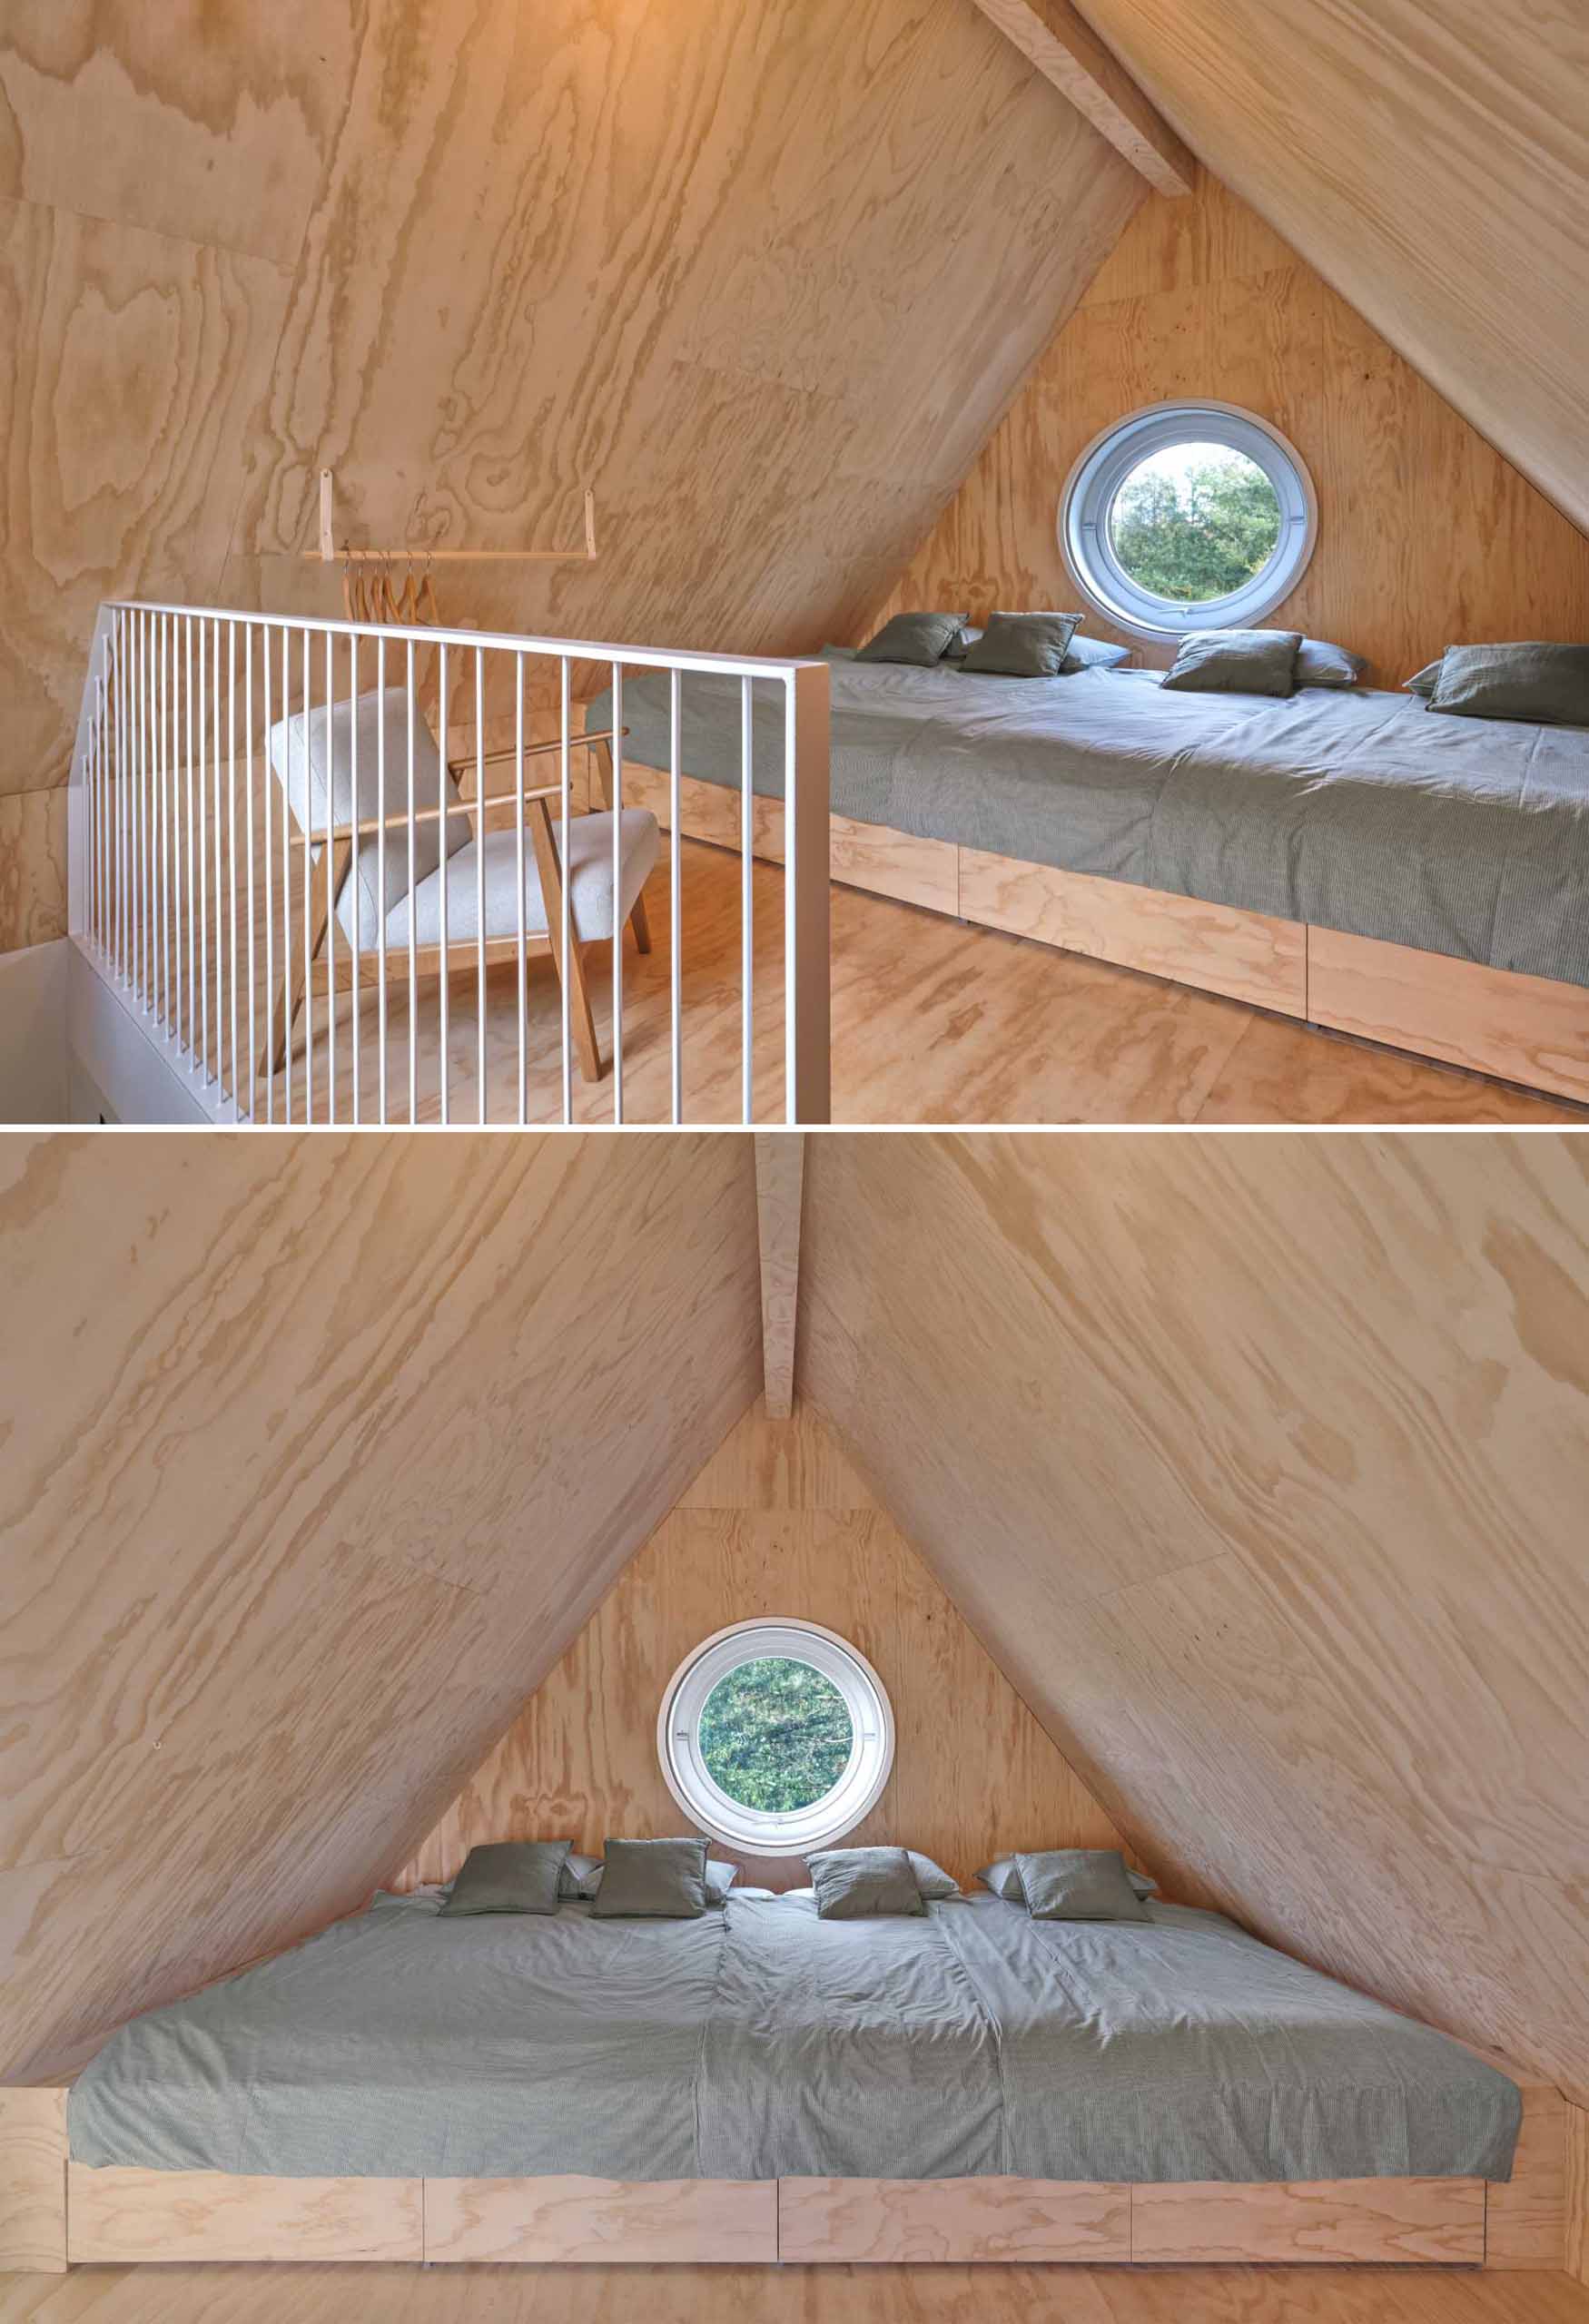 The sleeping area of a small elevated cabin.